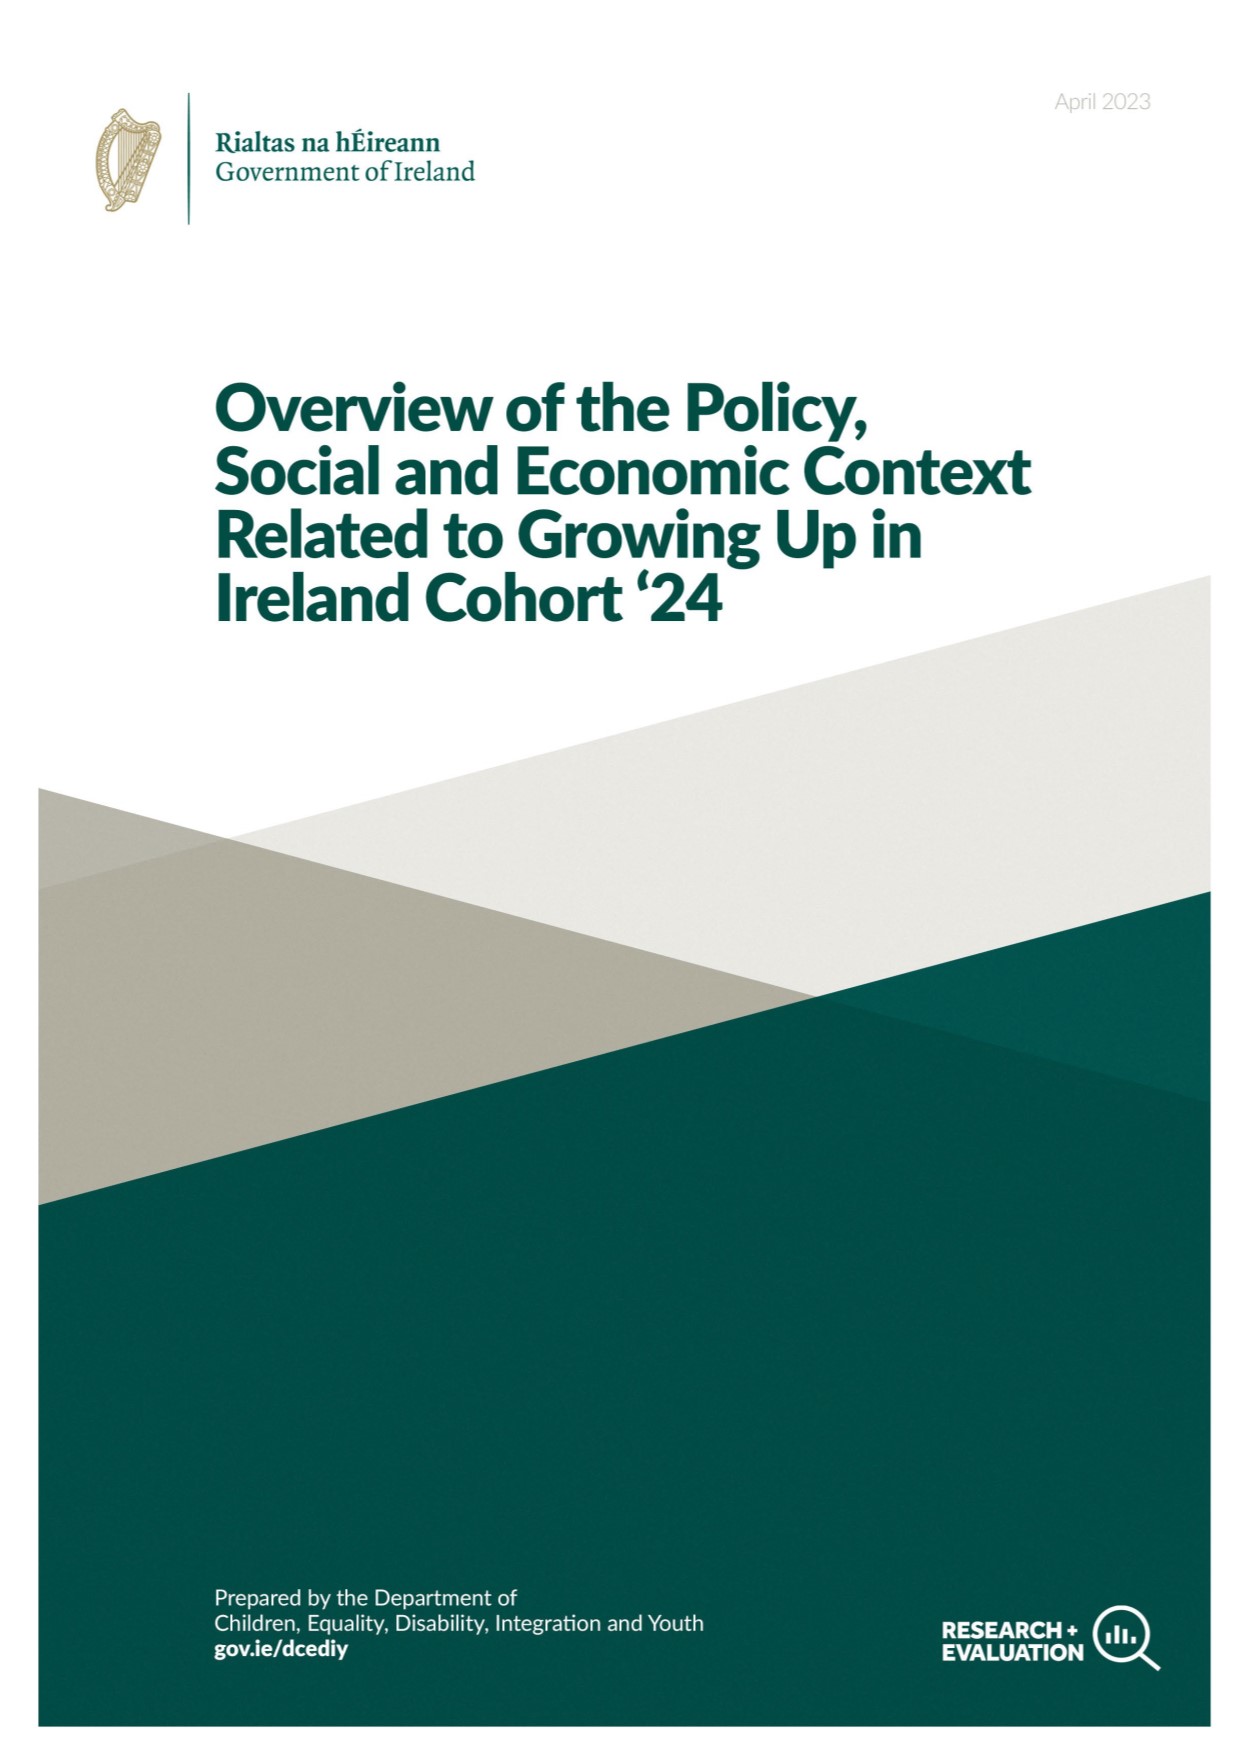 Overview of Policy Social and Economic Context Related to Growing Up in Ireland Cohort 24